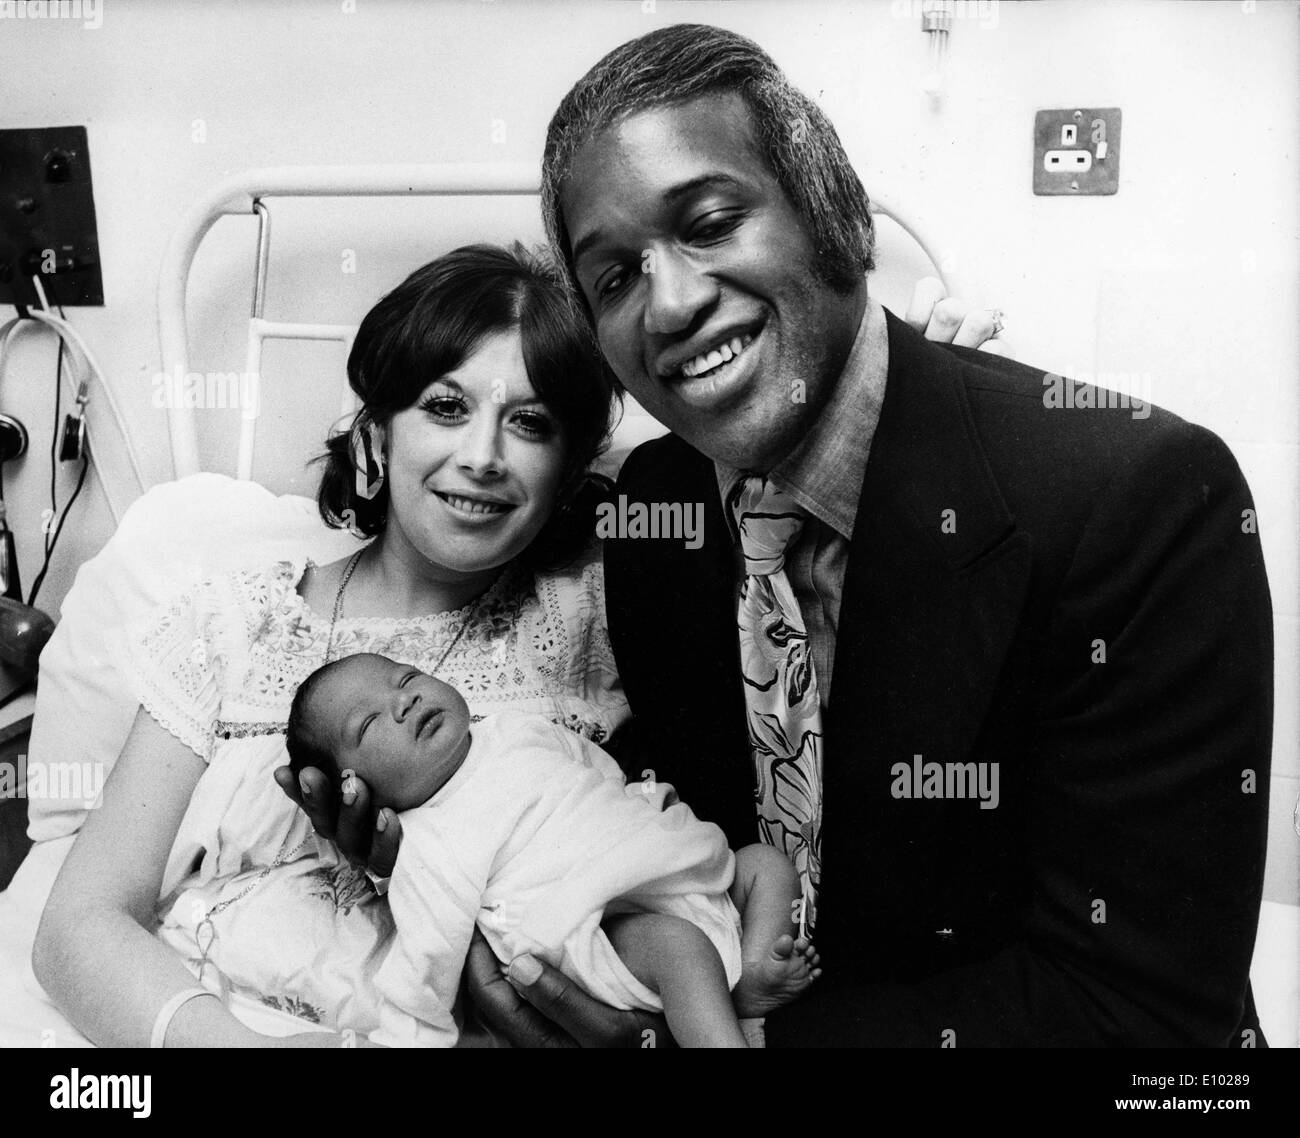 Singer Lovelace Watkins with girlfriend and baby Stock Photo